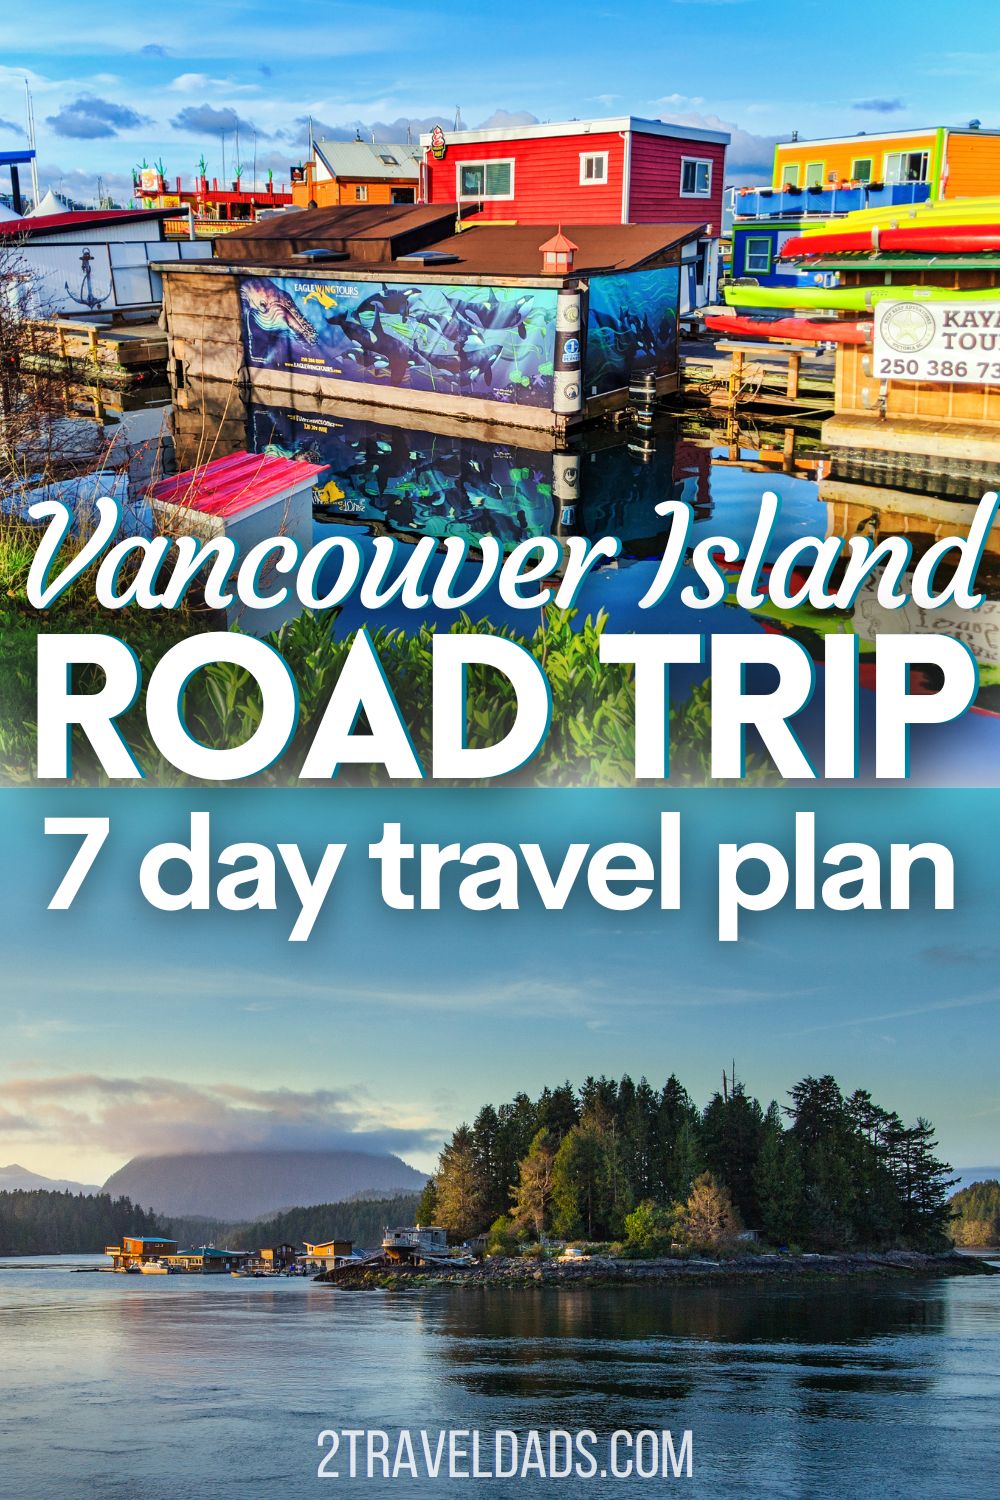 The Vancouver Island road trip is a quintessential Pacific Northwest experience. From Victoria BC to Tofino and the Strait of Georgia, we've got a road trip plan that's amazing for a week on Vancouver Island.